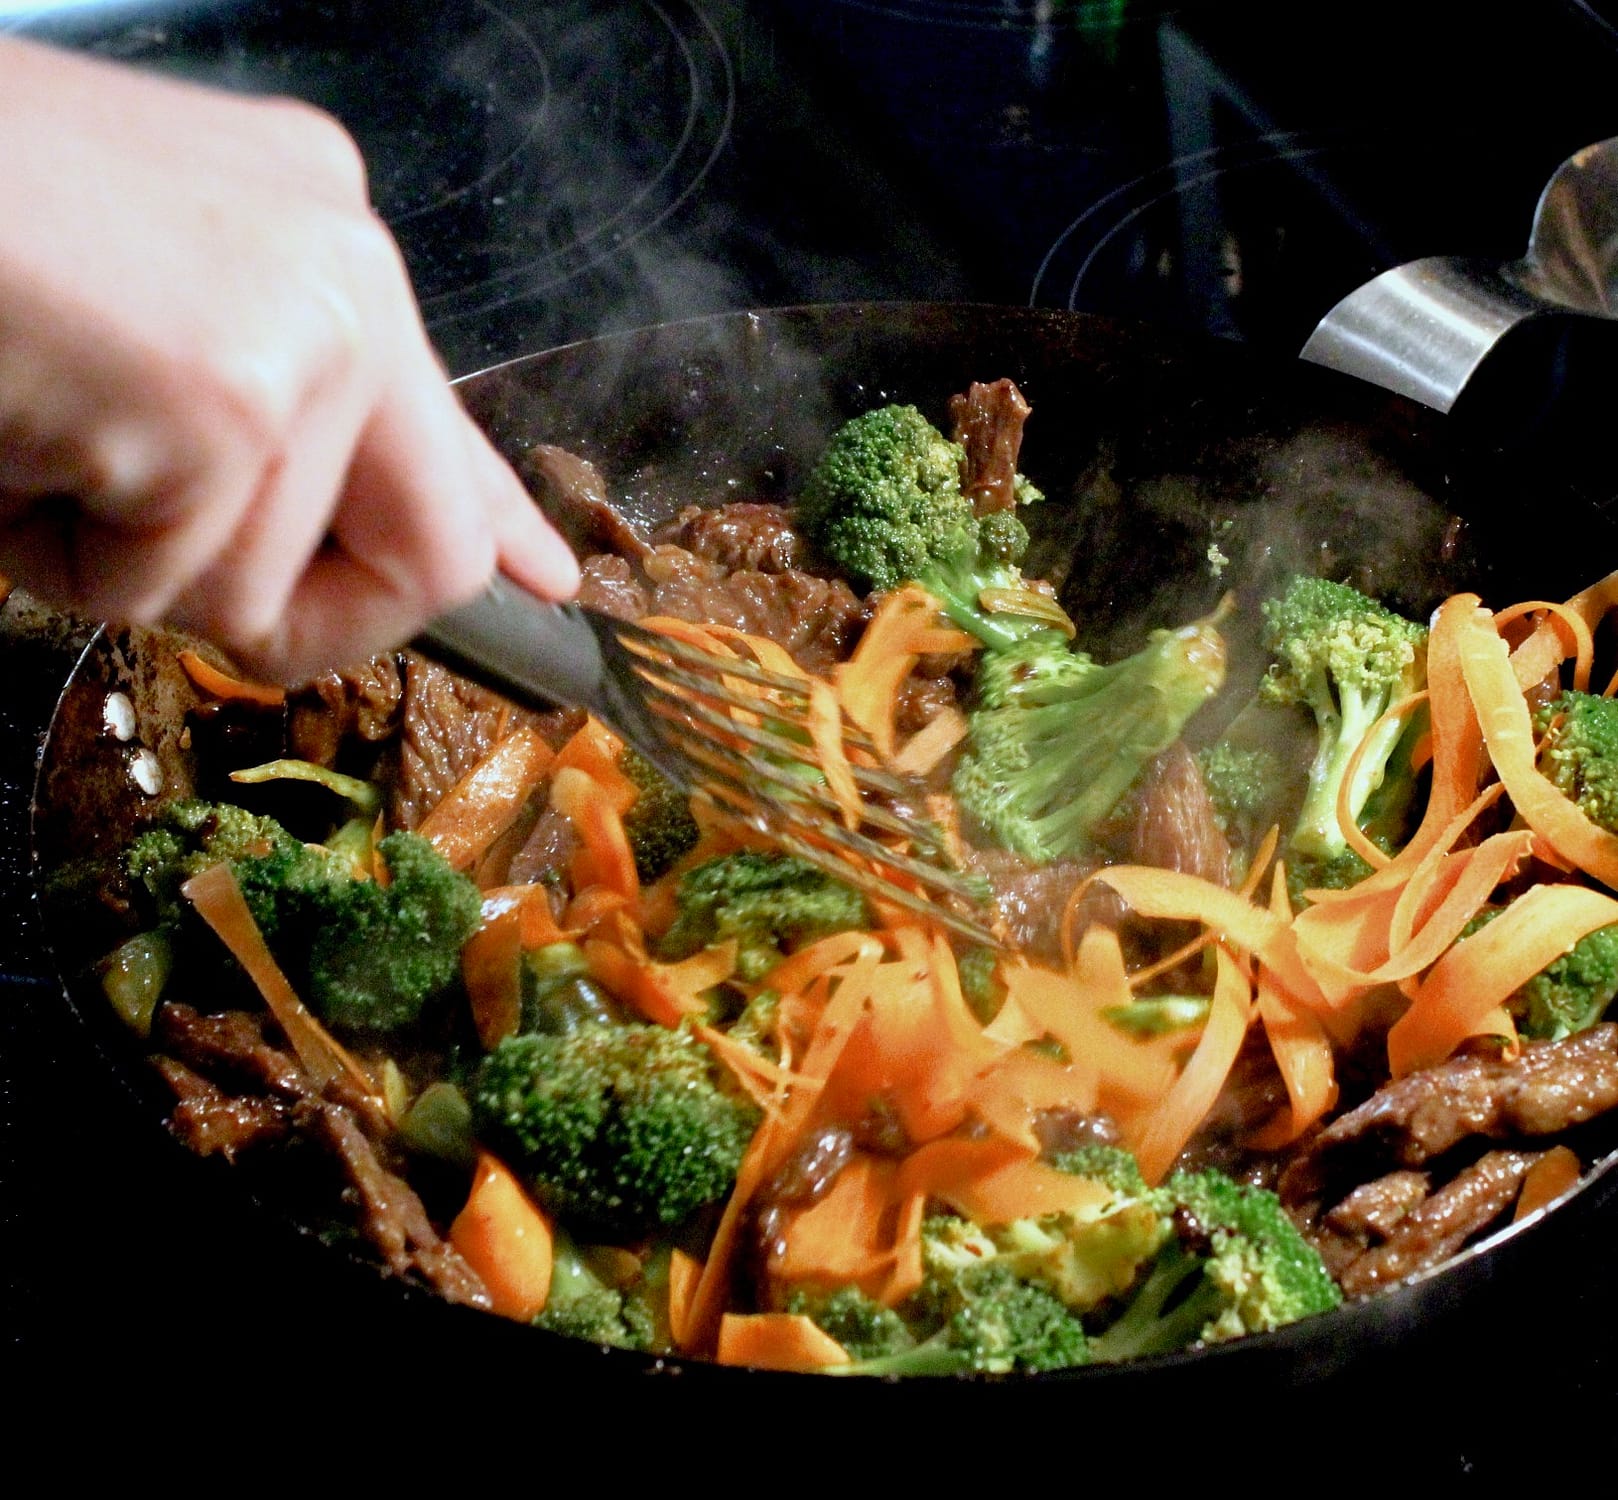 Adding the remaining vegetables to the beef with broccoli.